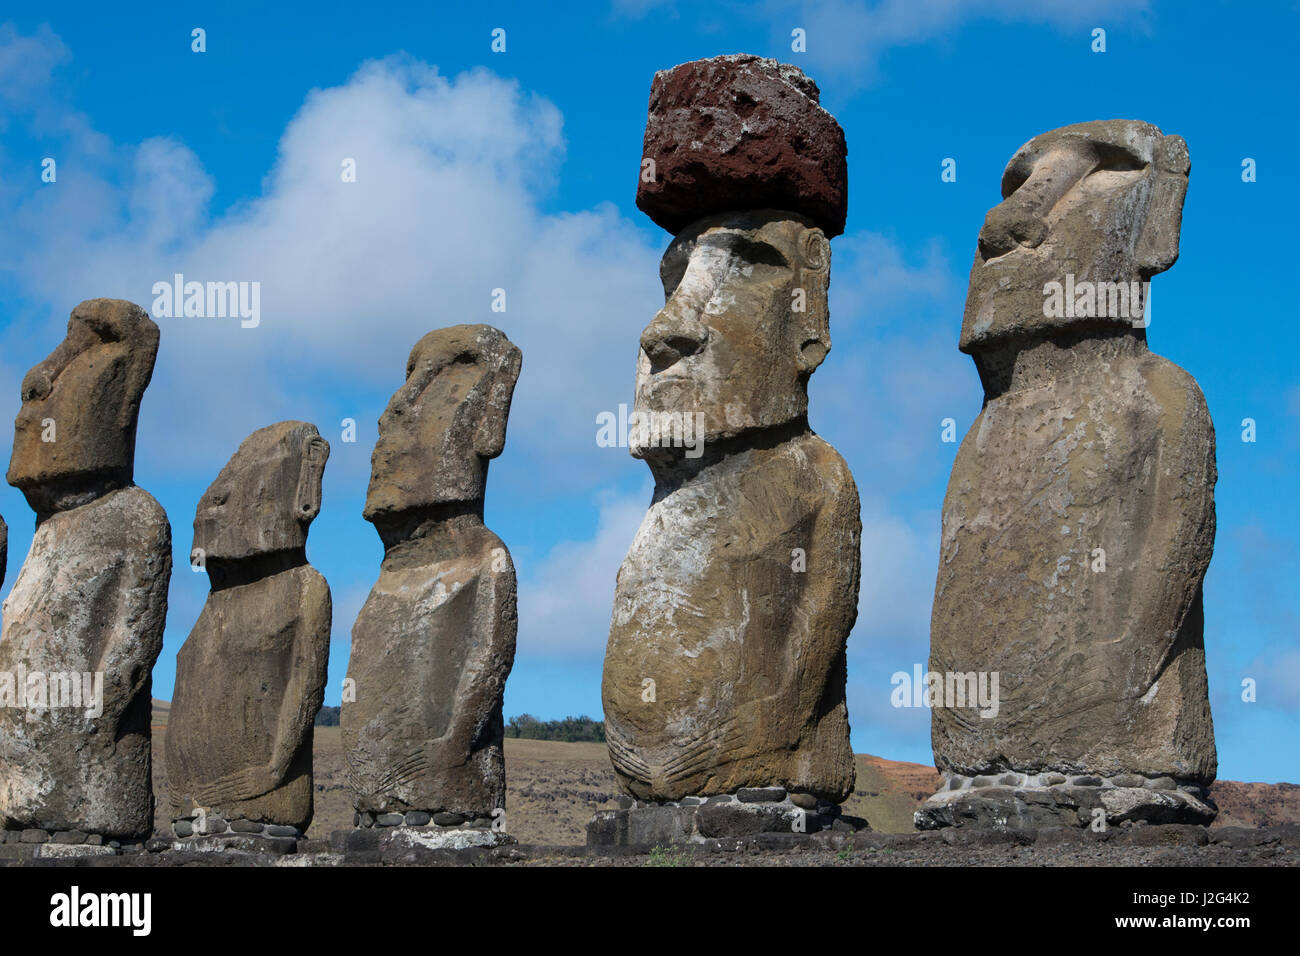 Chile, Easter Island, Hanga Nui. Rapa Nui National Park, Ahu Tongariki. Fifteen large moi statues on the largest ceremonial platform in all of Polynesia. Moi with pukao (headdress). Stock Photo